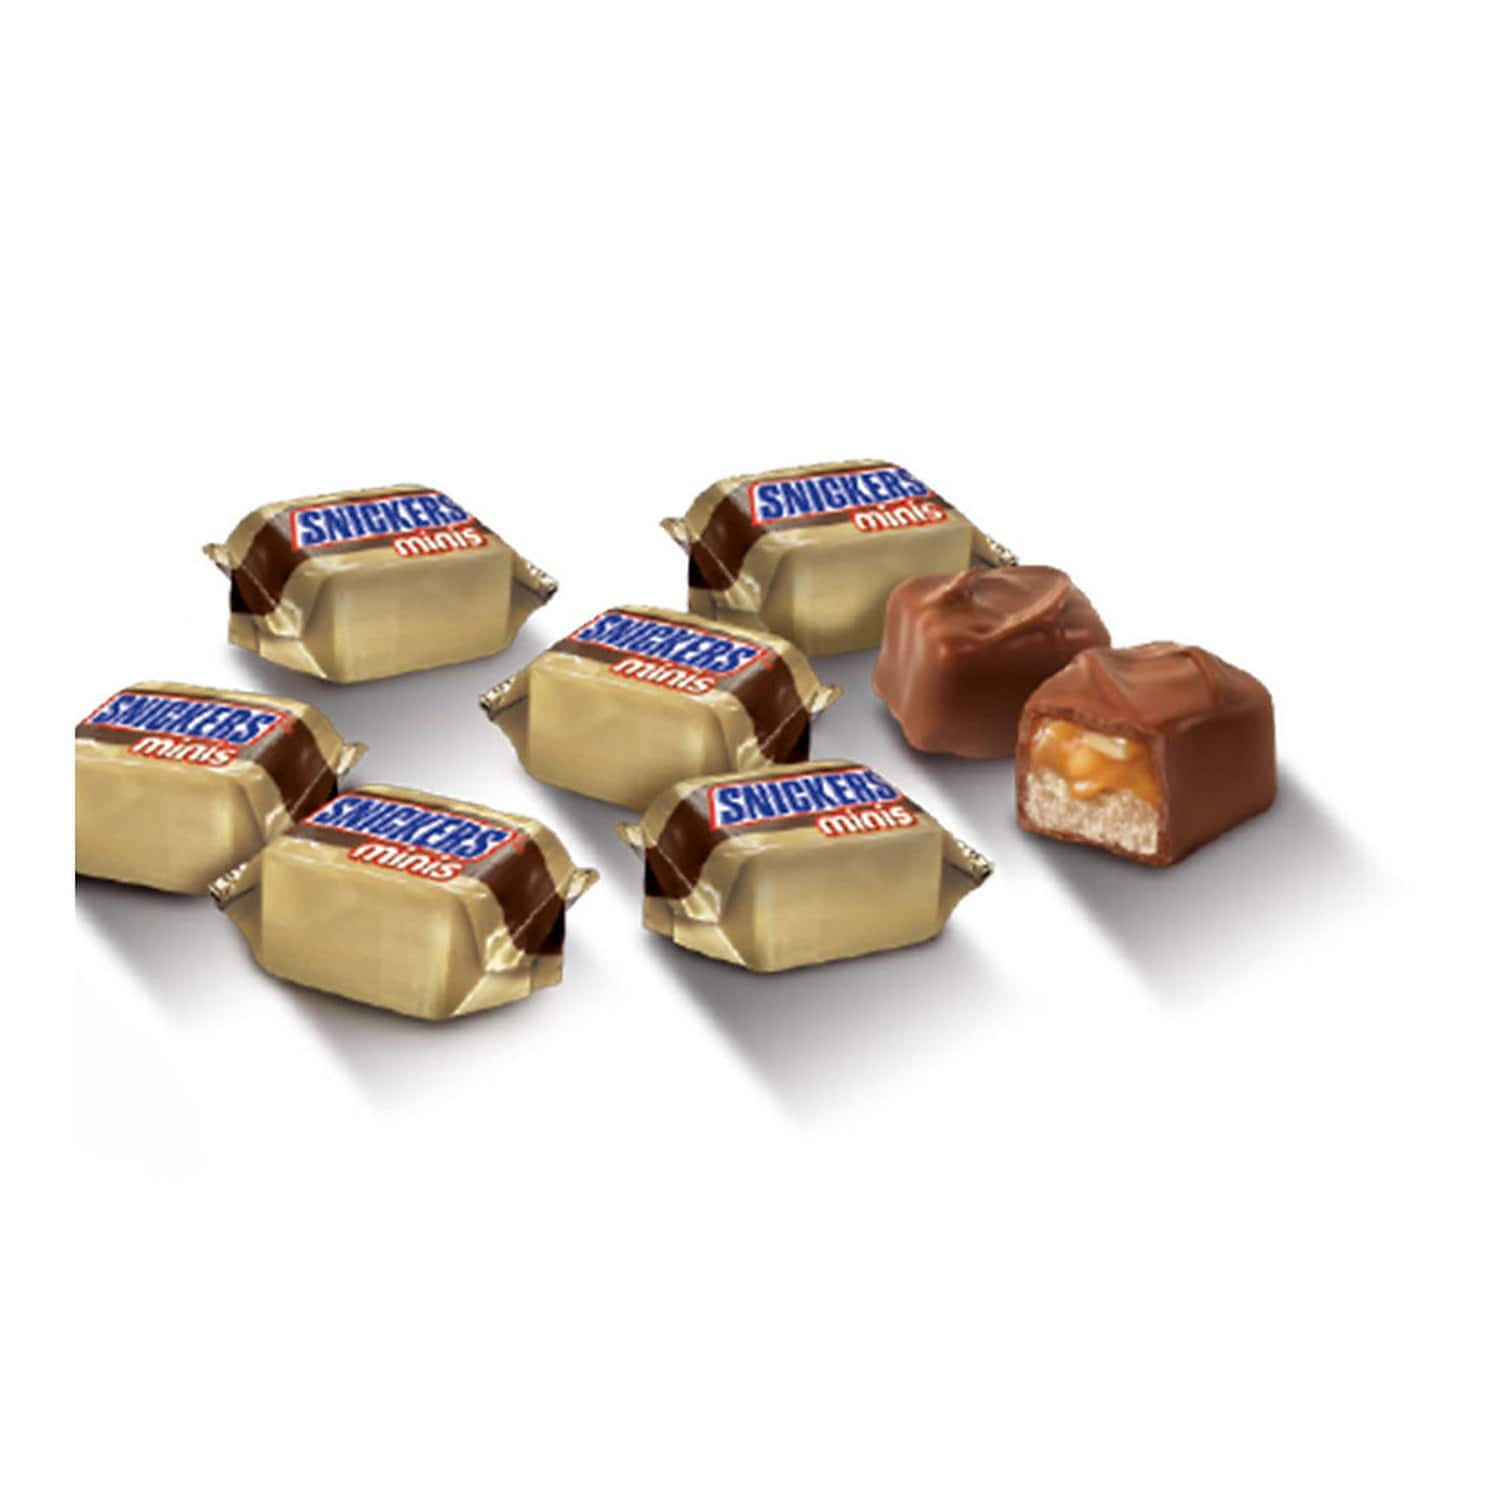 Snickers Bar, Minis, Family Size - 18.0 oz